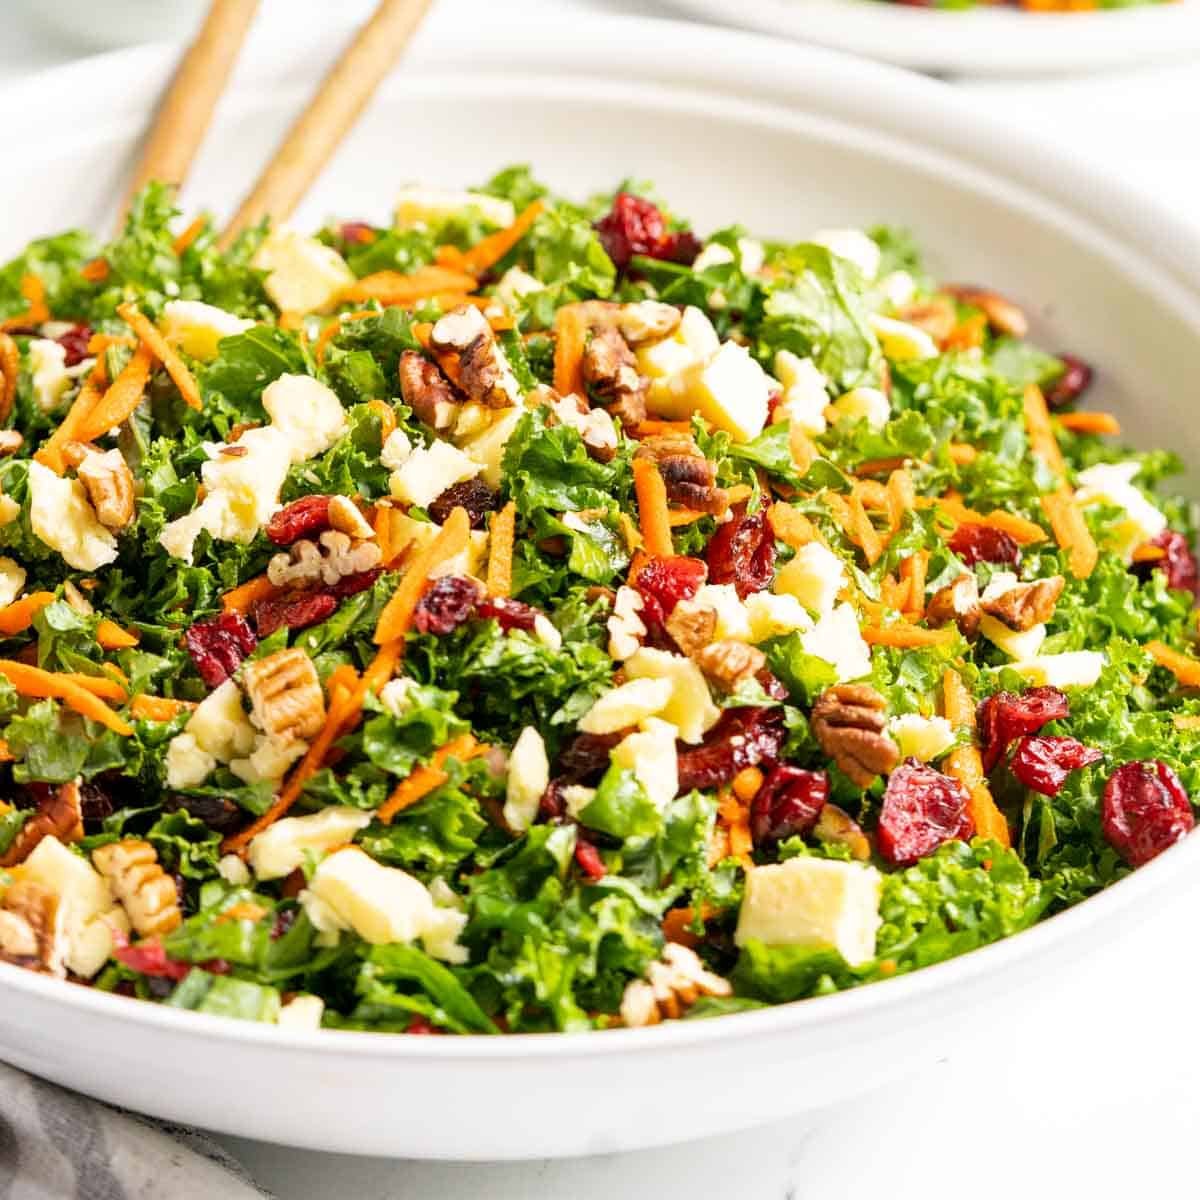 A close-up view of a white bowl with kale and cranberry salad.